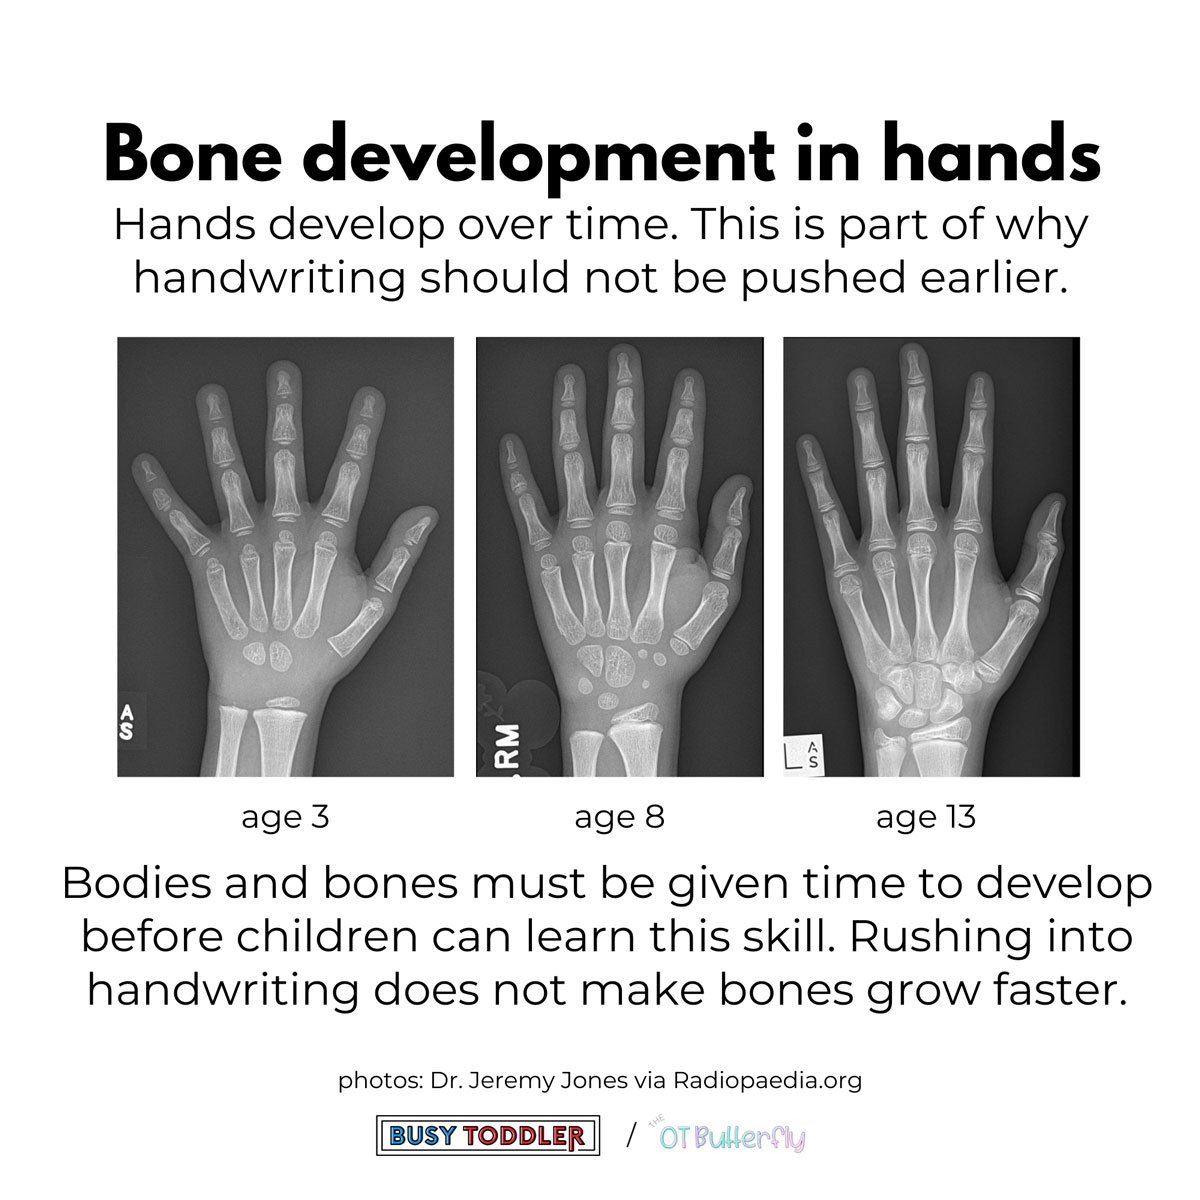 Bone development in hand: image shows an x-ray of three children's hands at ages 3, 8, and 13 to explain bone growth and its impact on handwriting.